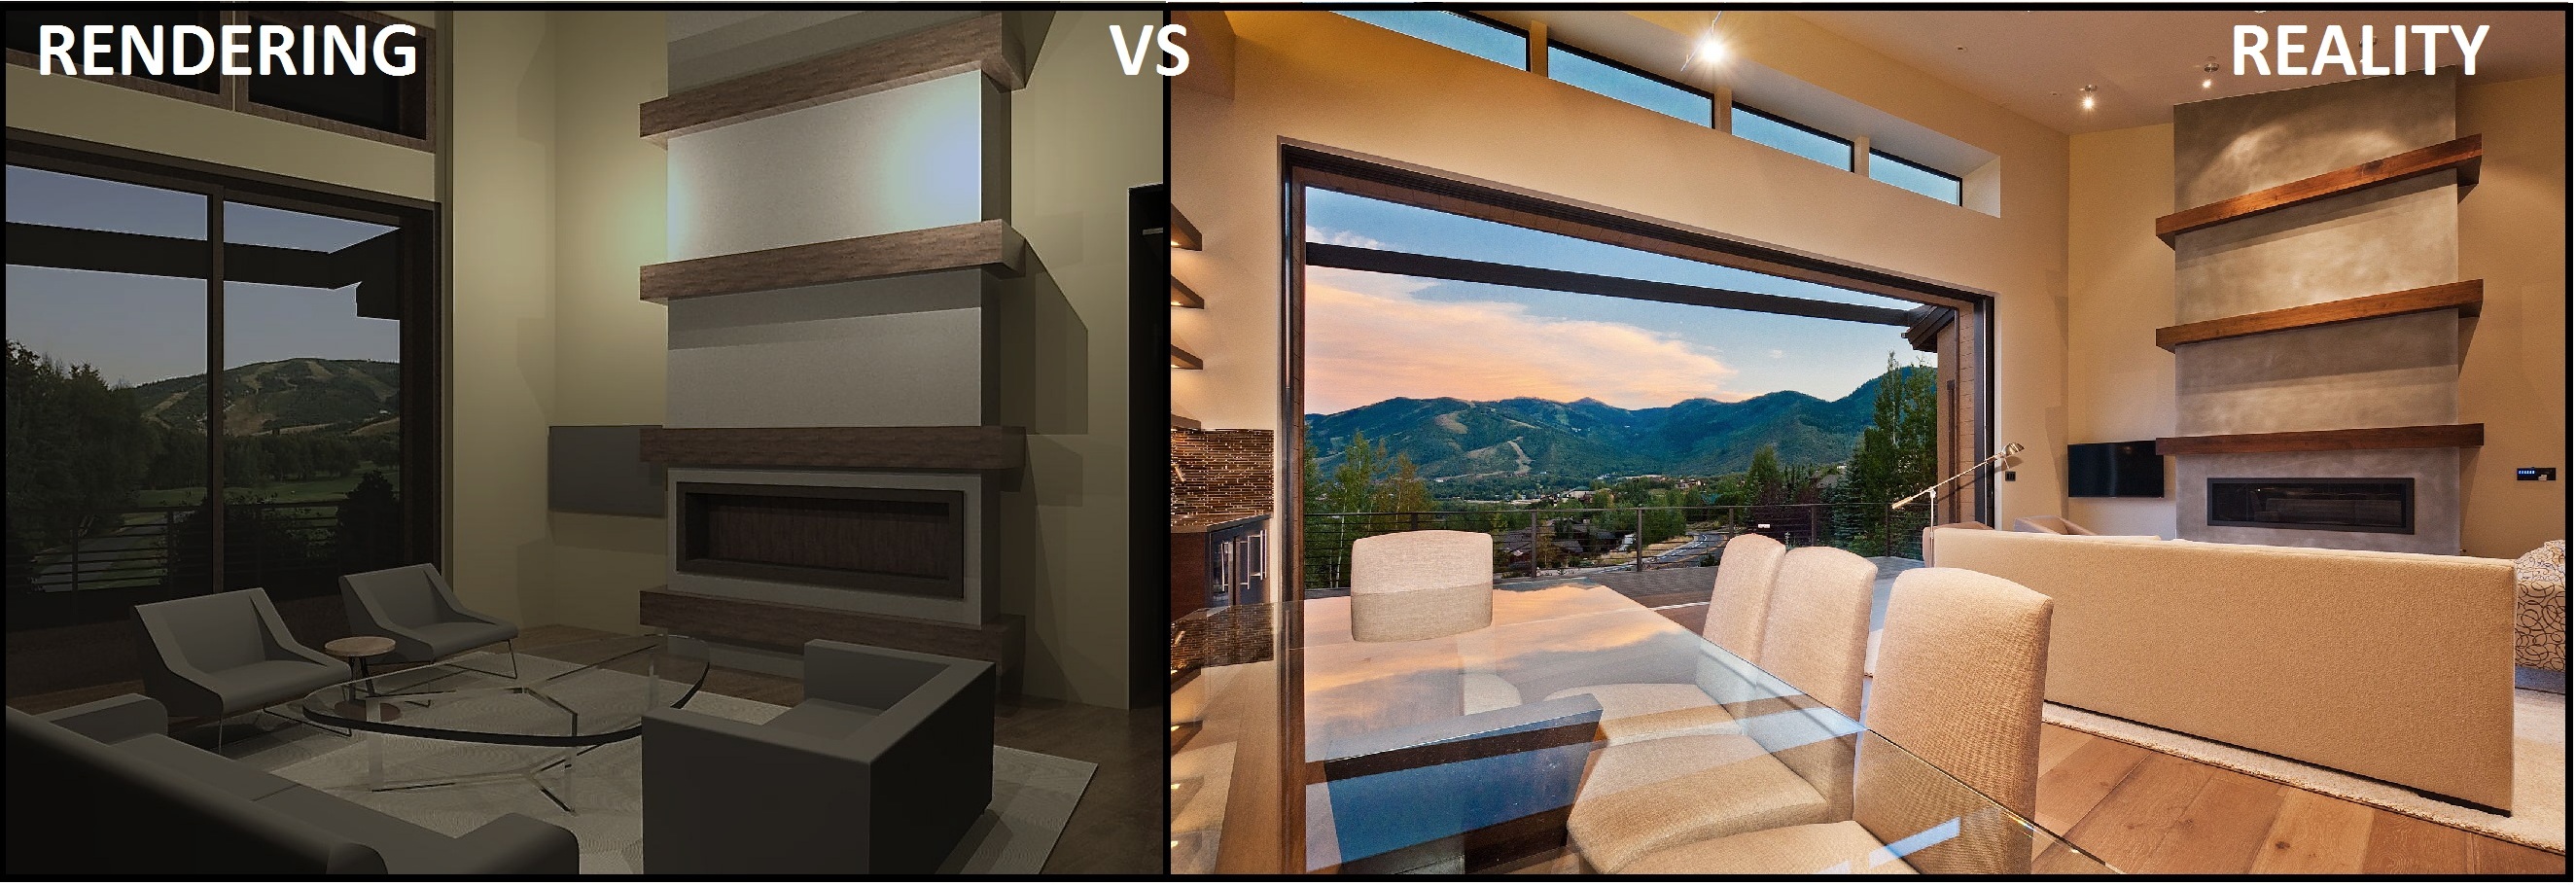 Rendering vs Reality Fireplace